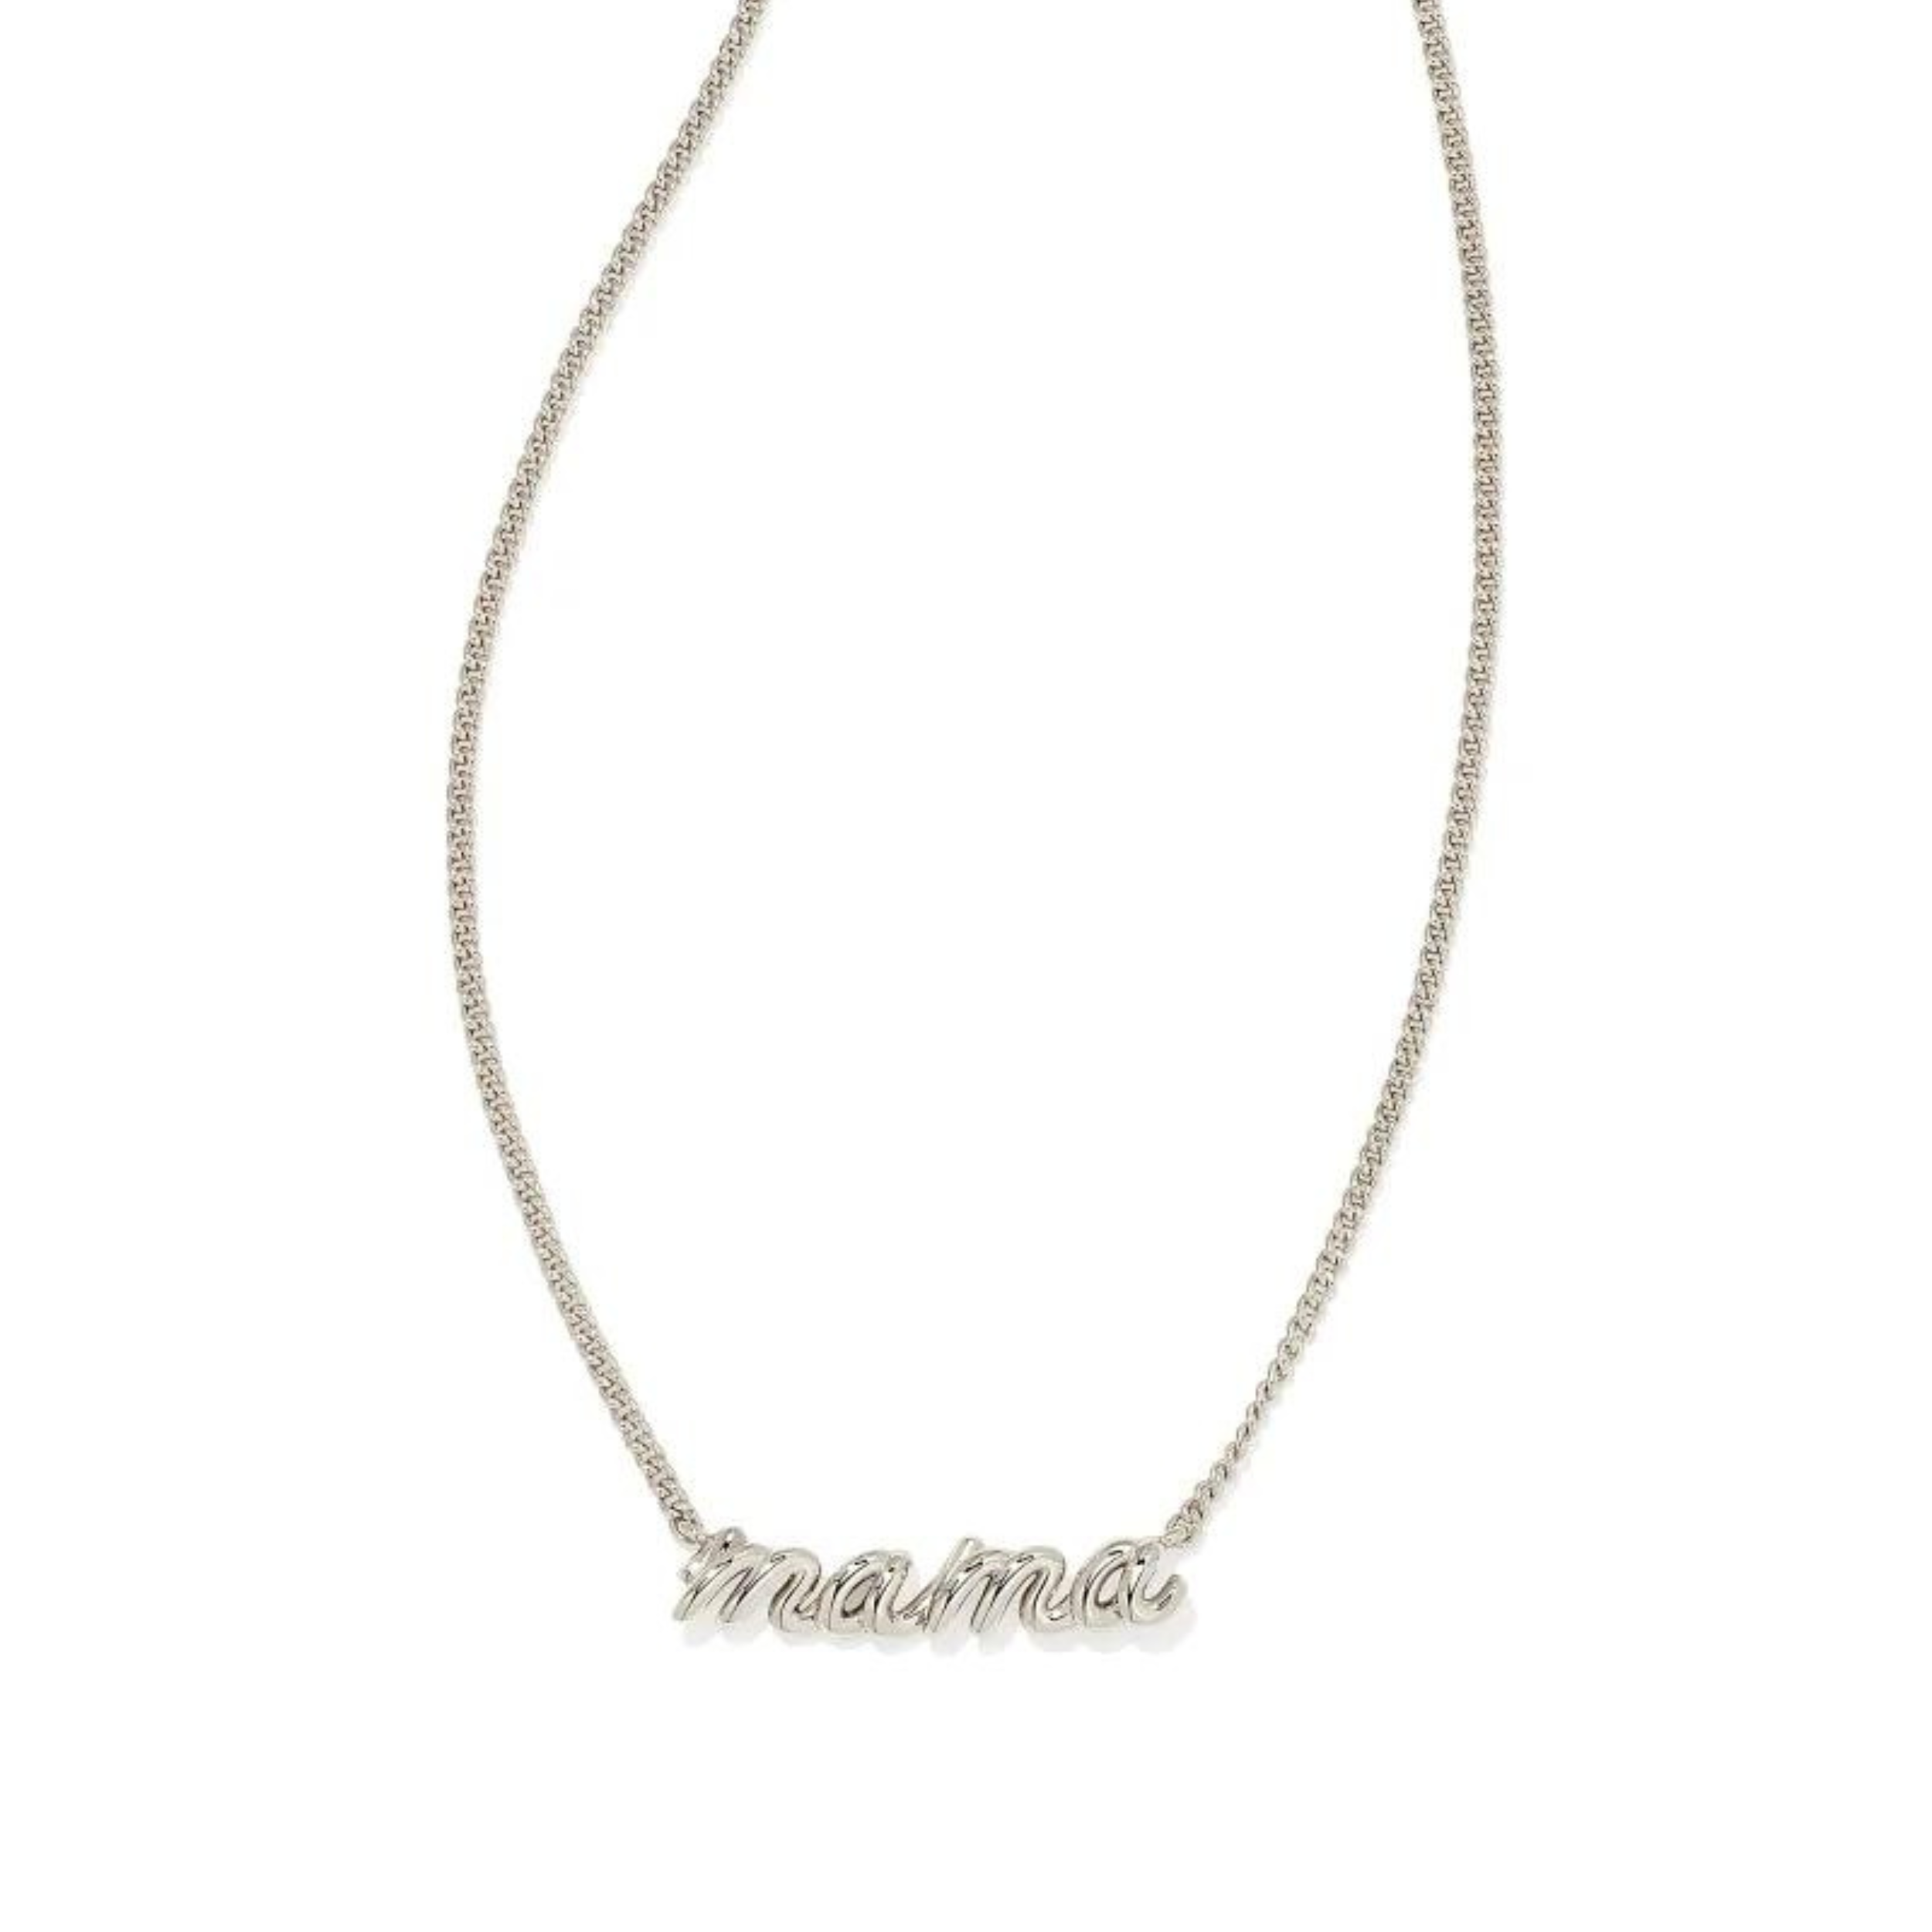 Silver necklace with the word mama in cursive, pictured on a white background.